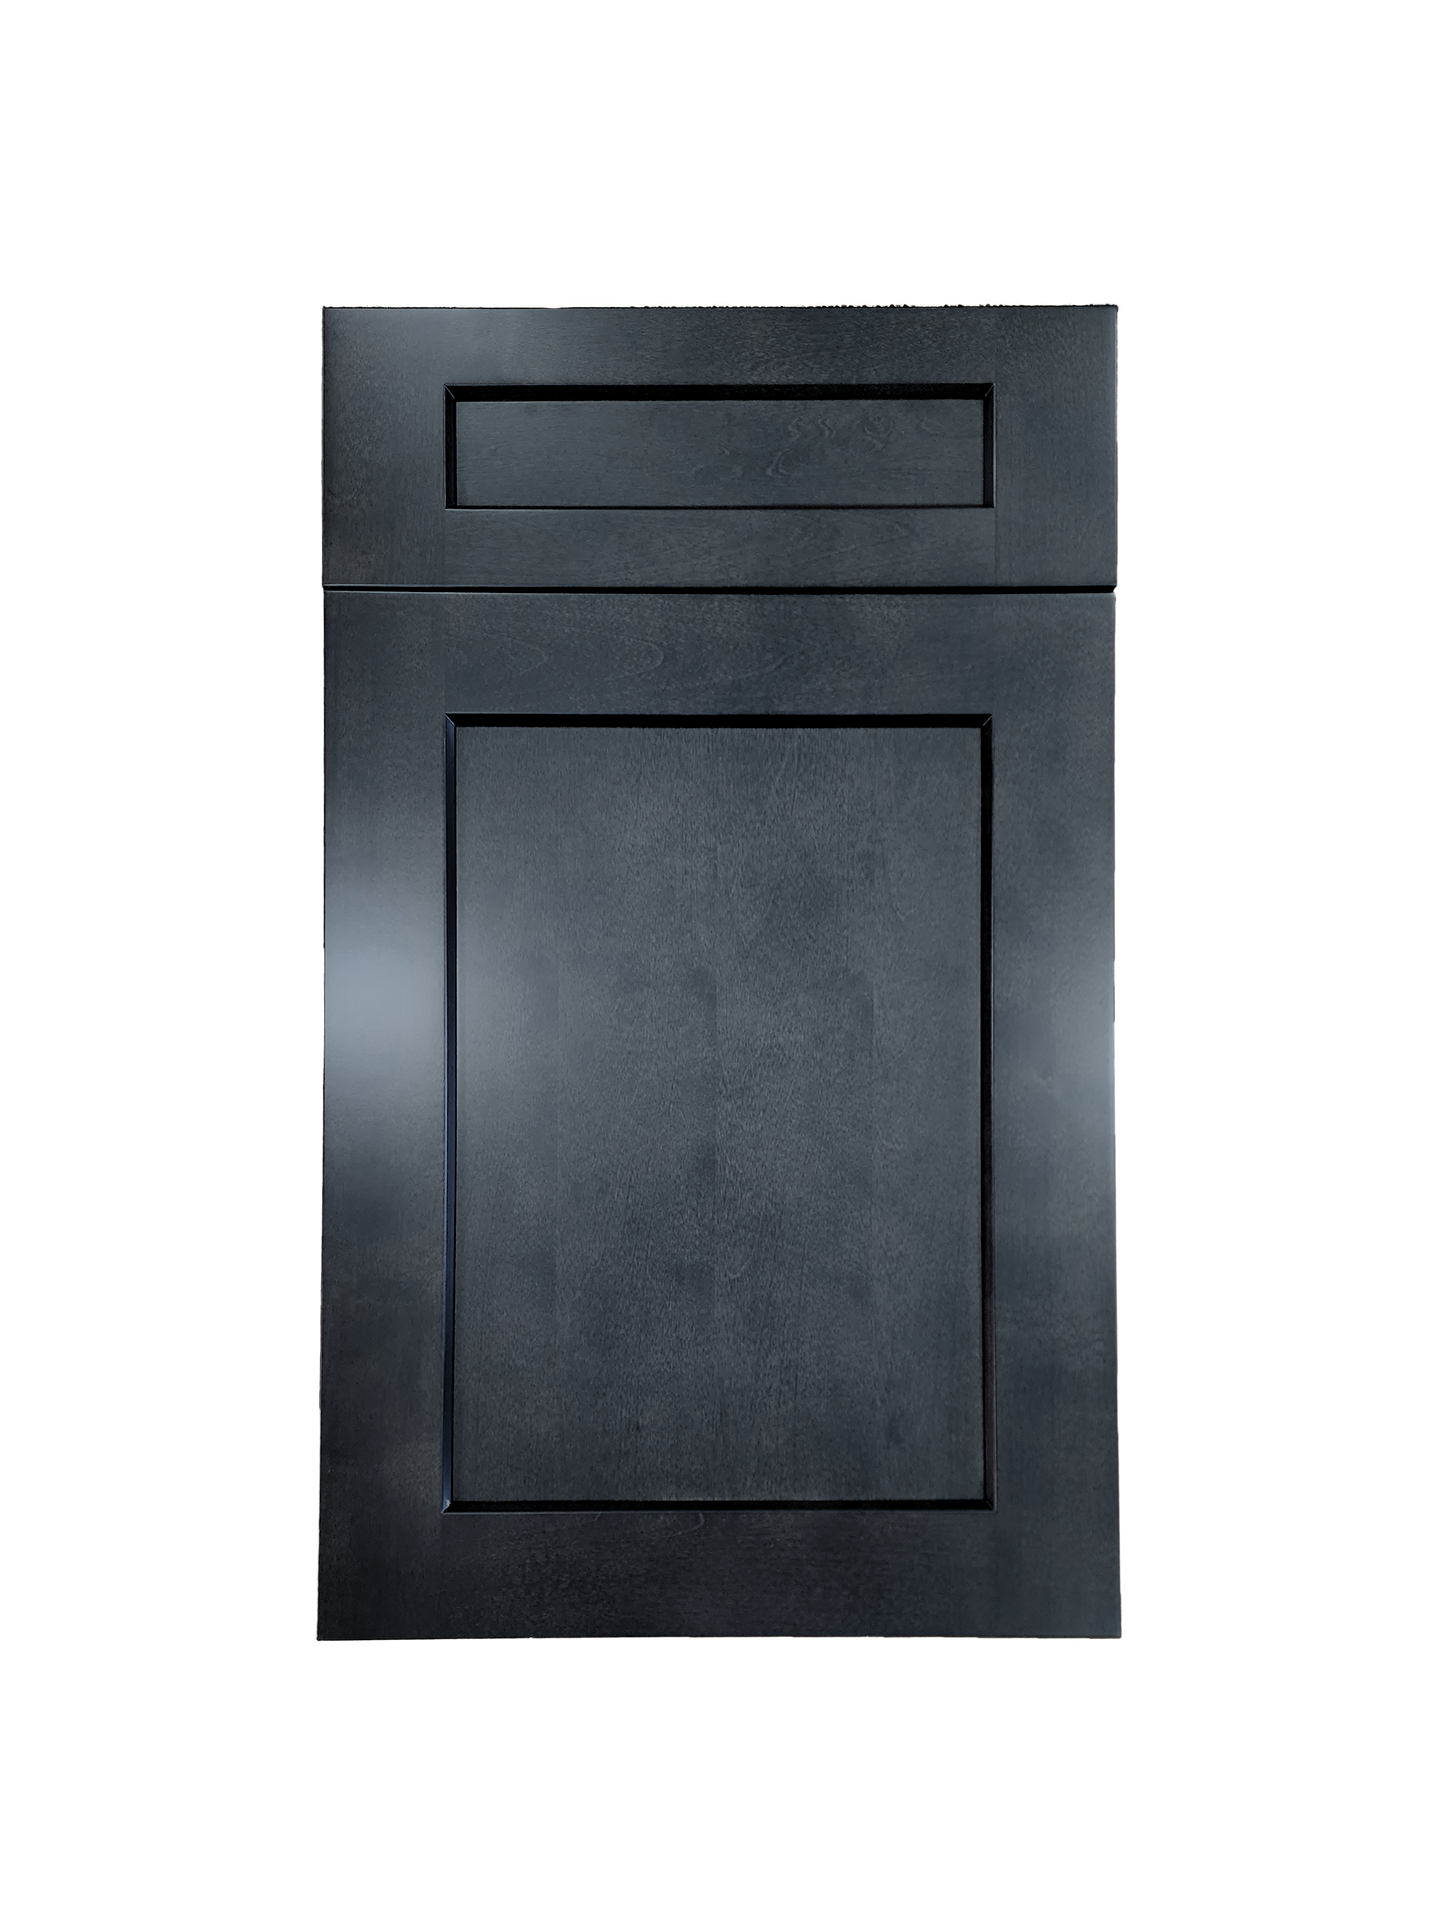 Stormy Grey Wall Cabinet 33 inches wide 12 inches deep 18 inches tall with Stormy Grey box and Stormy Grey doors